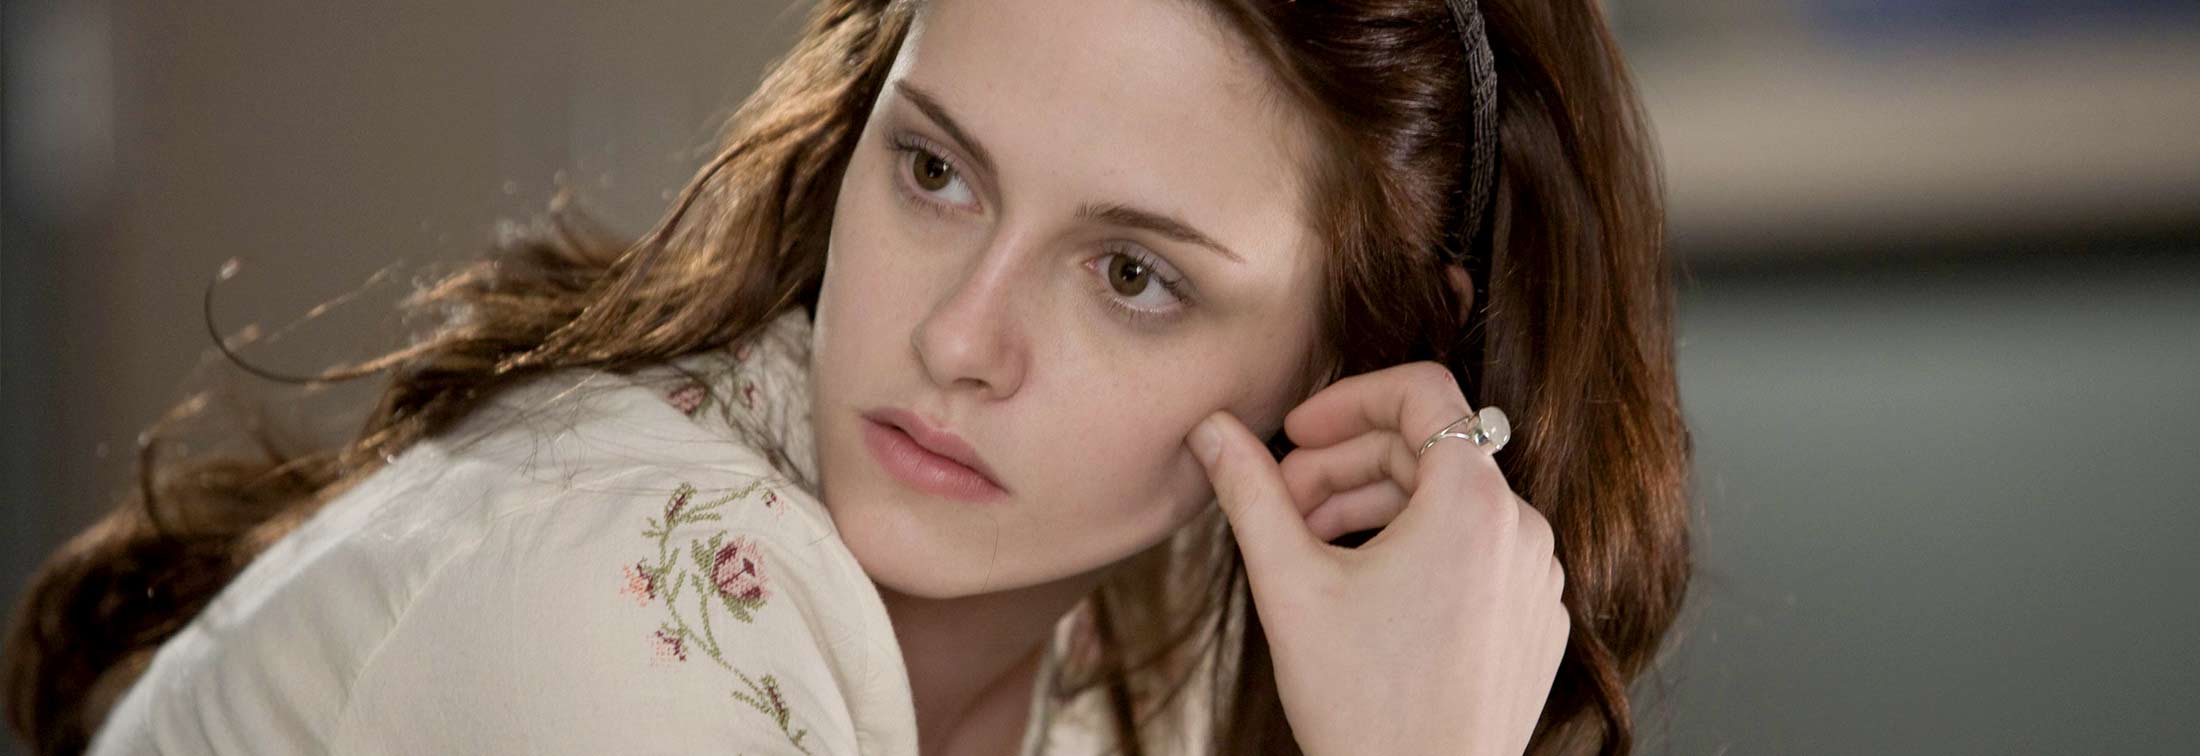 Kristen Stewart: From 'Twilight' to Arthouse - Celebrating a career as unique as the actress herself